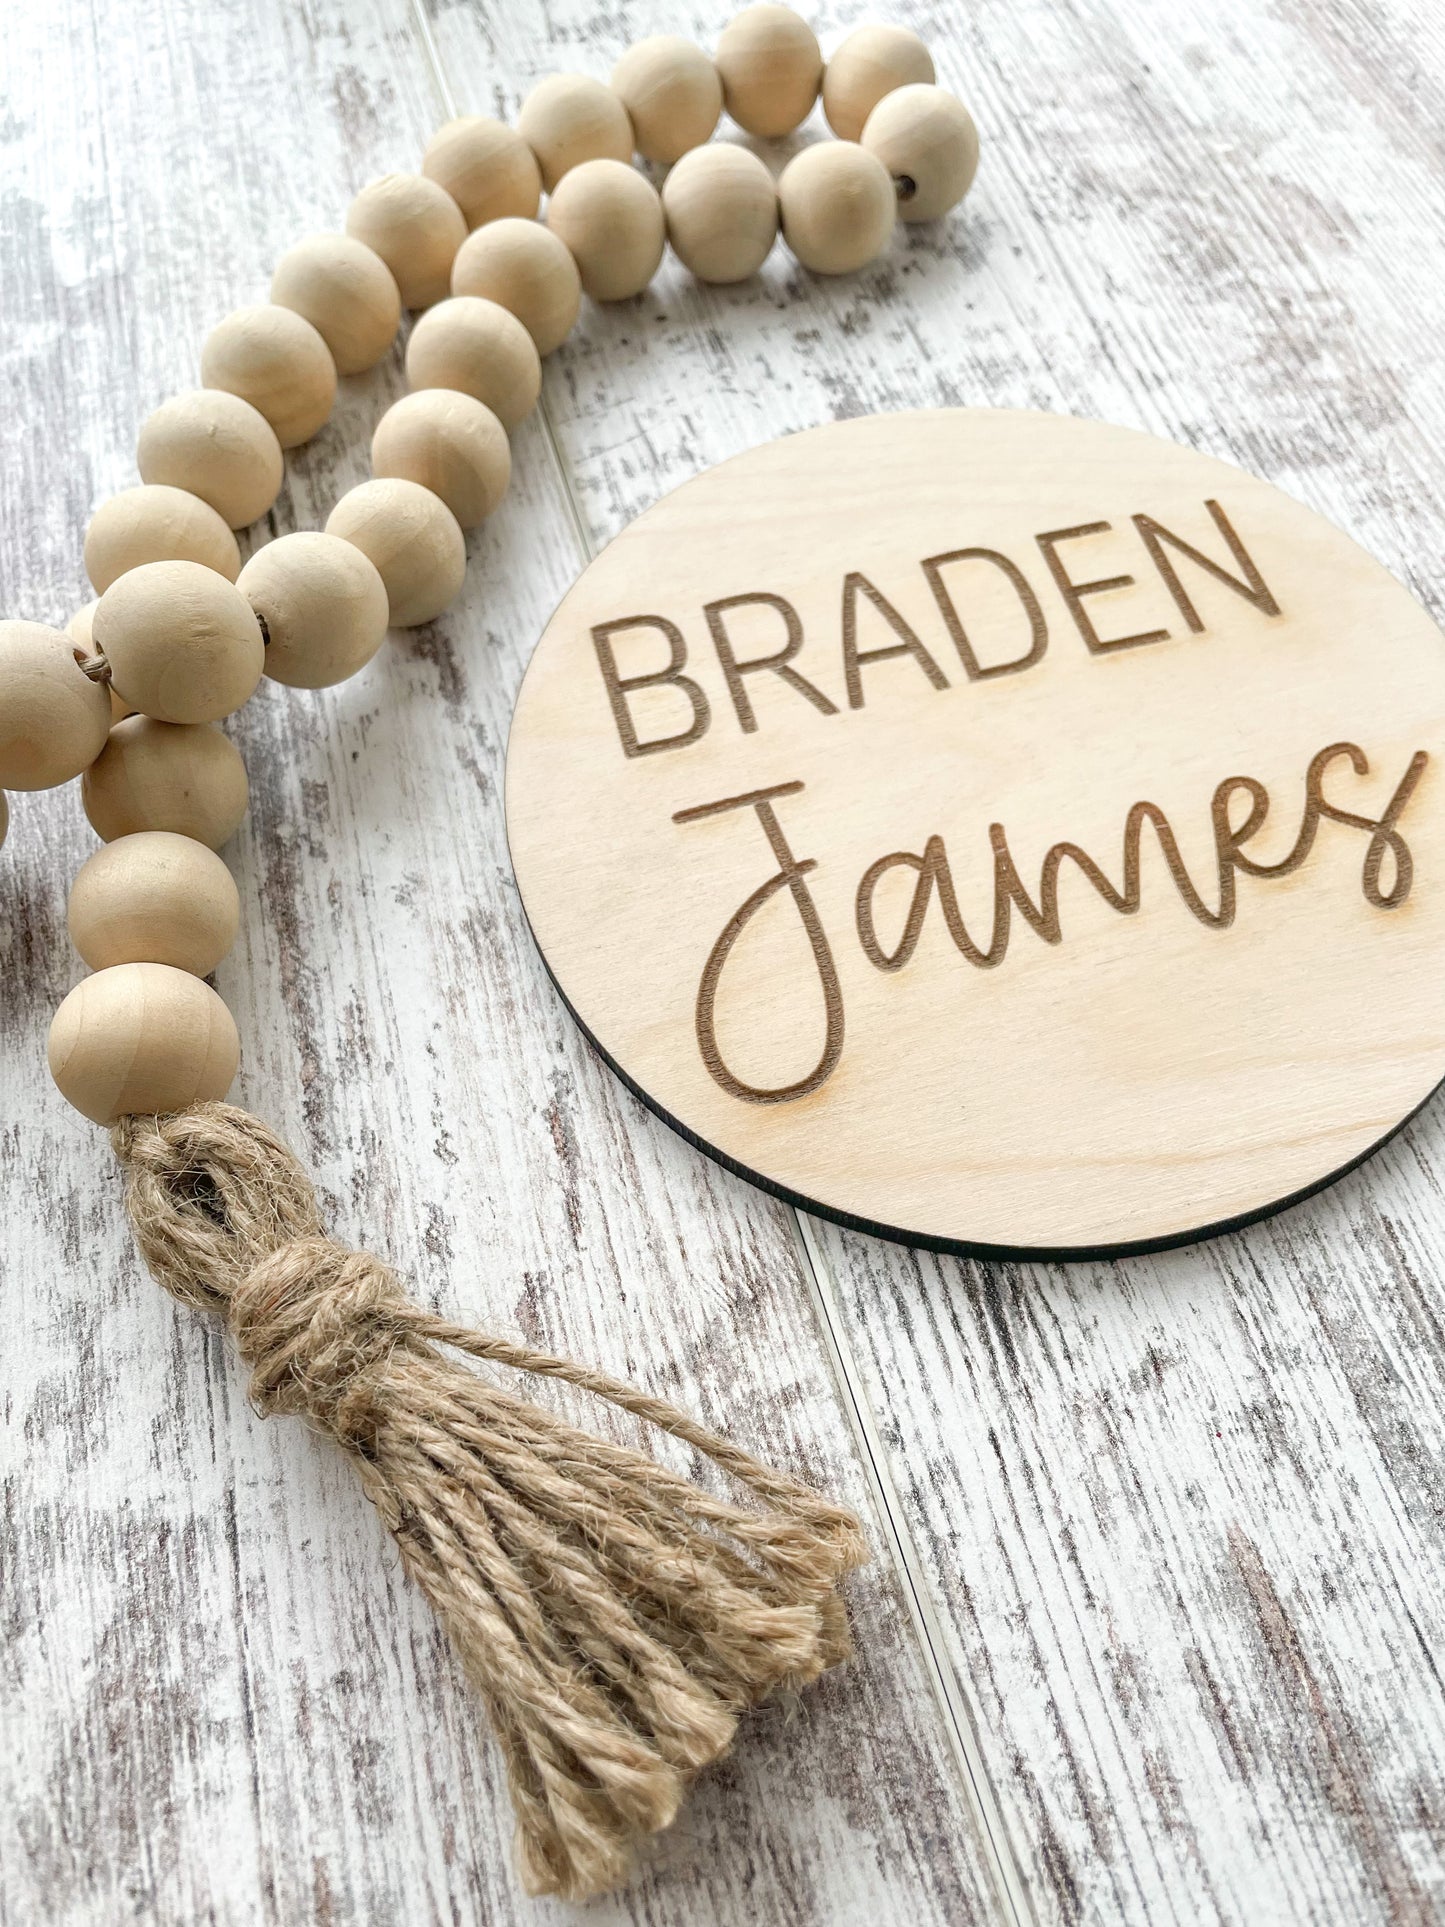 Personalized Name Wood Sign